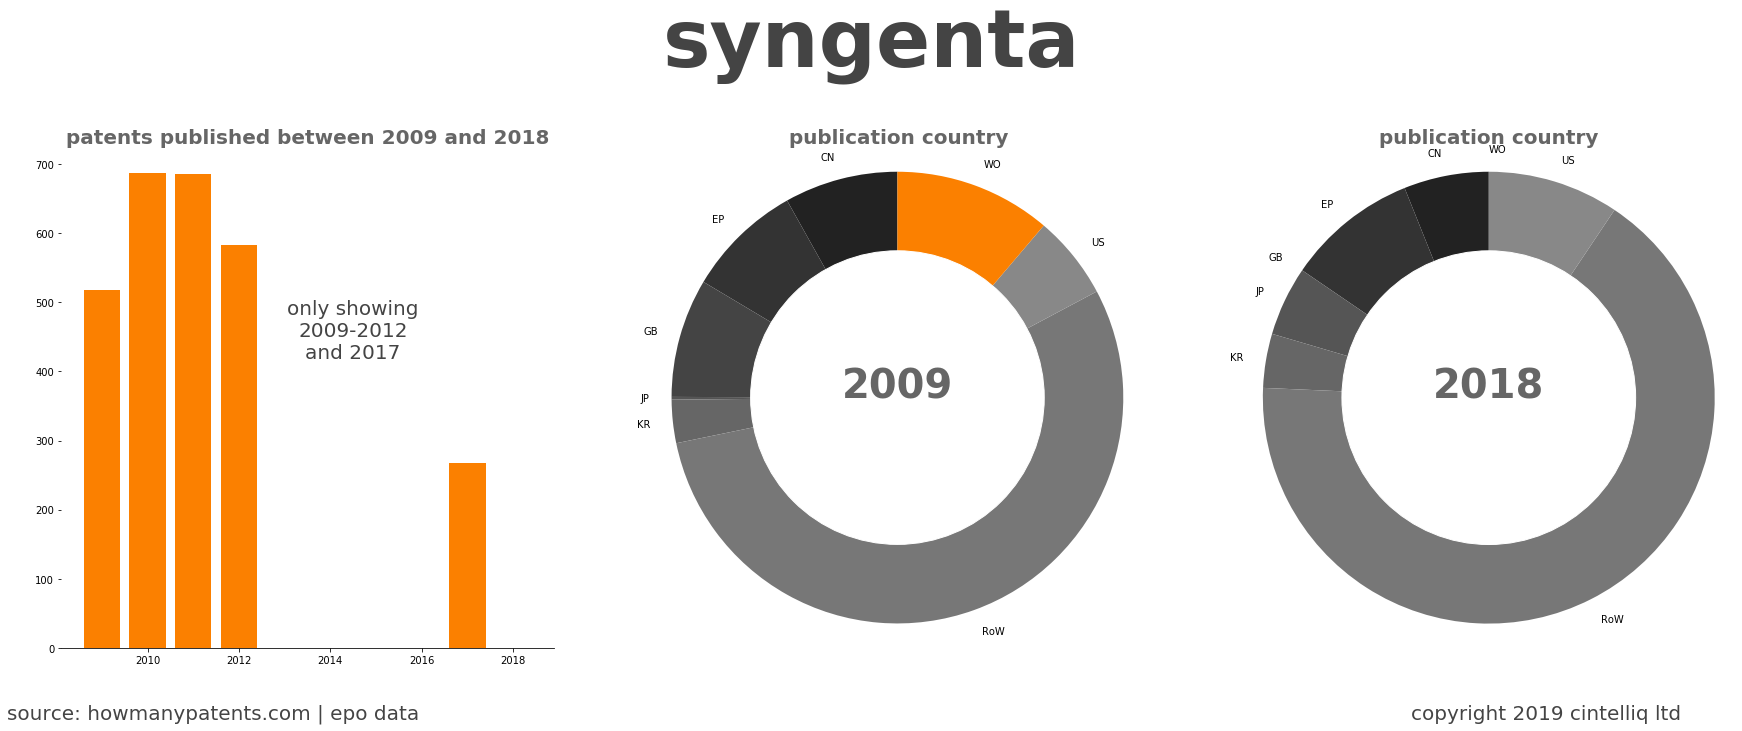 summary of patents for Syngenta